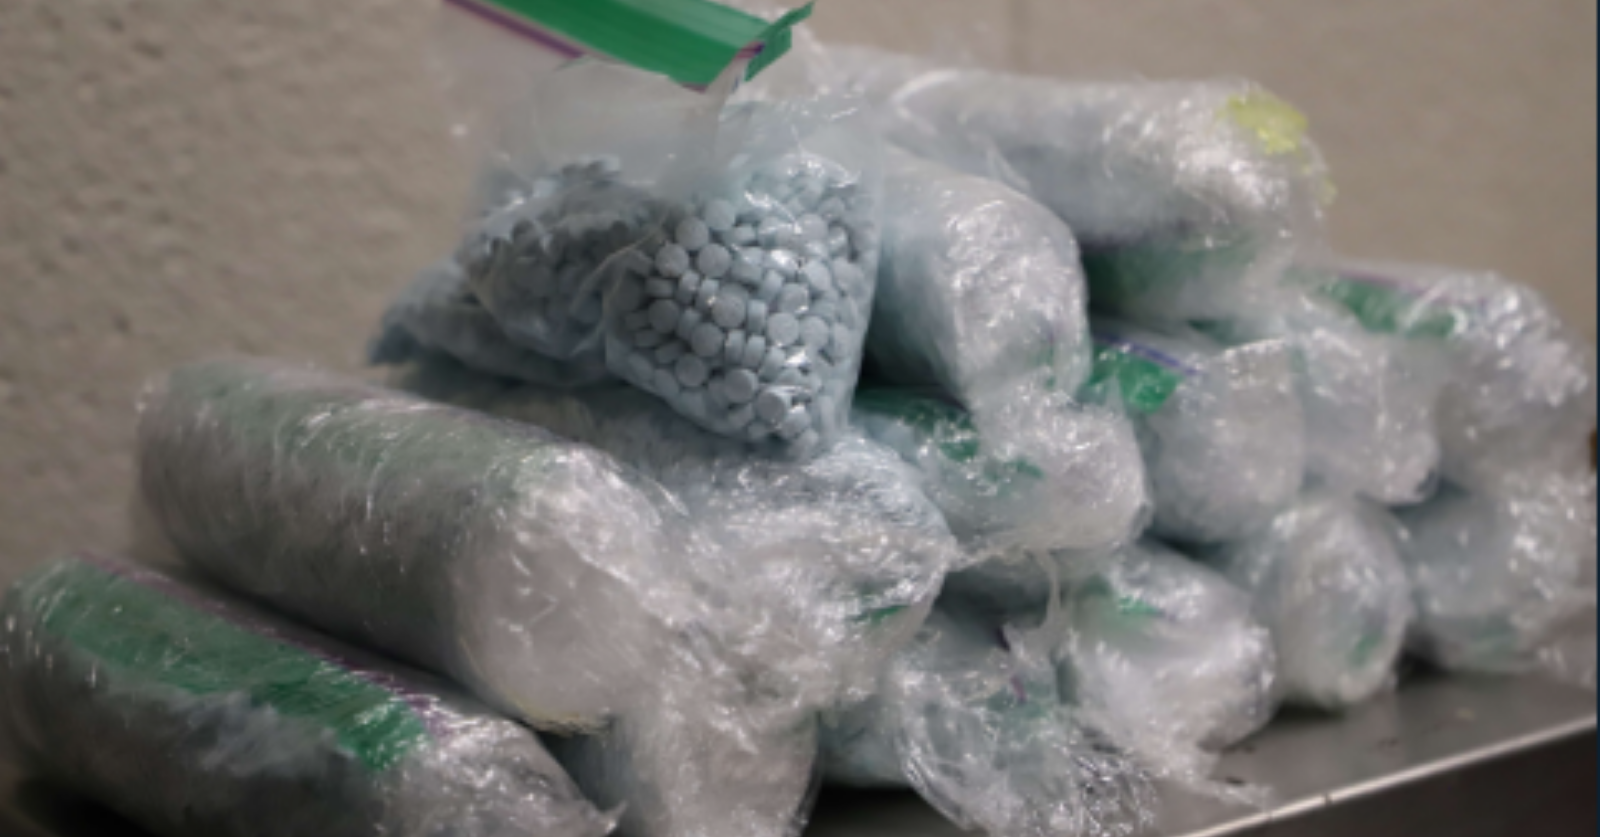 Fentanyl purity varies significantly in illicit pills, new analysis finds